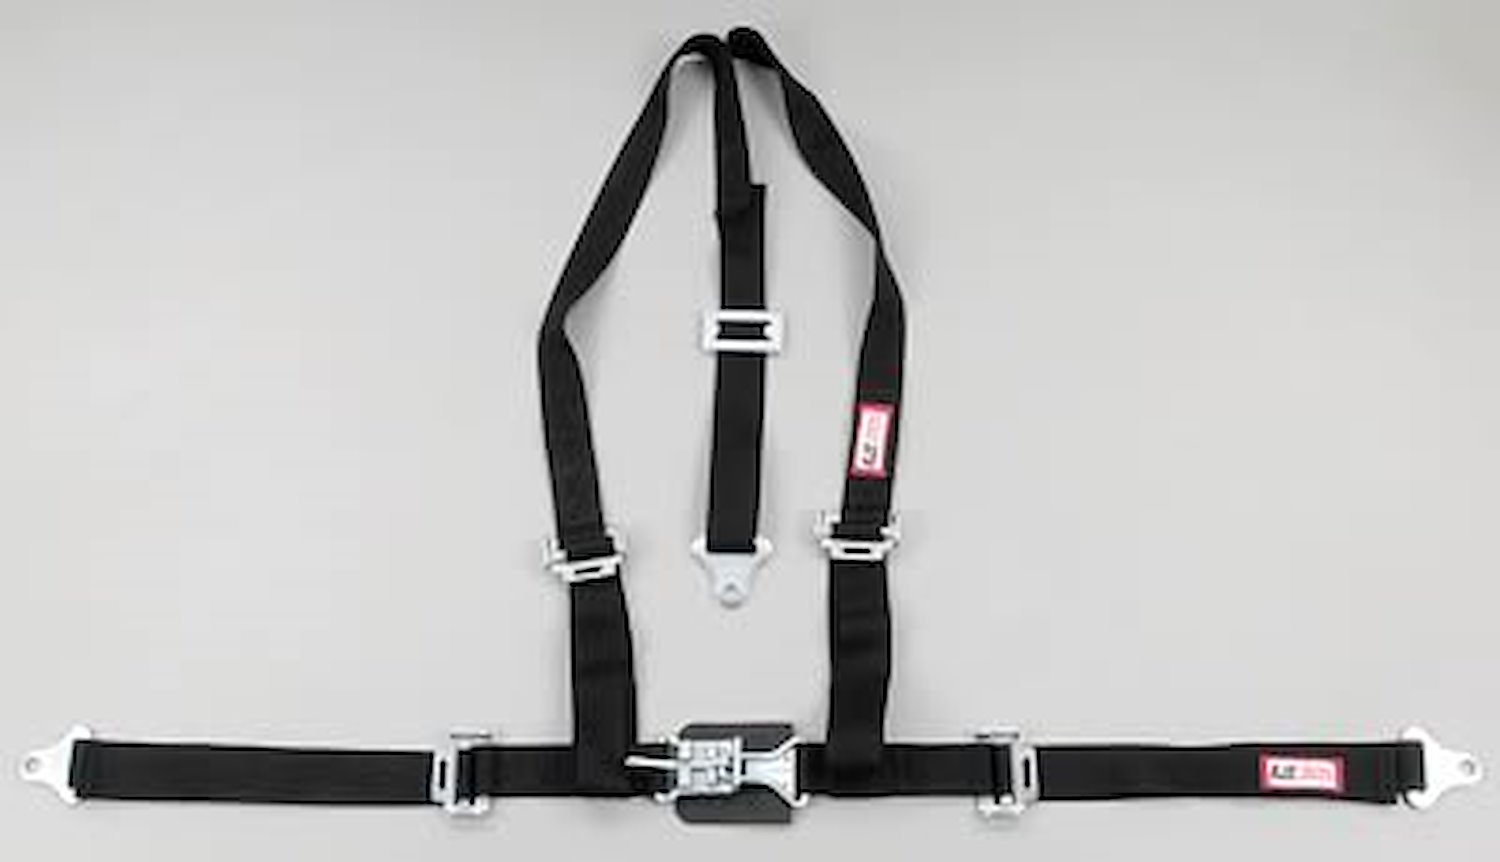 NON-SFI L&L HARNESS 2 PULL DOWN Lap Belt BOLT SEWN IN 2 S.H. Y FLOOR Mount w/STERNUM STRAP WRAP/BOLT RED